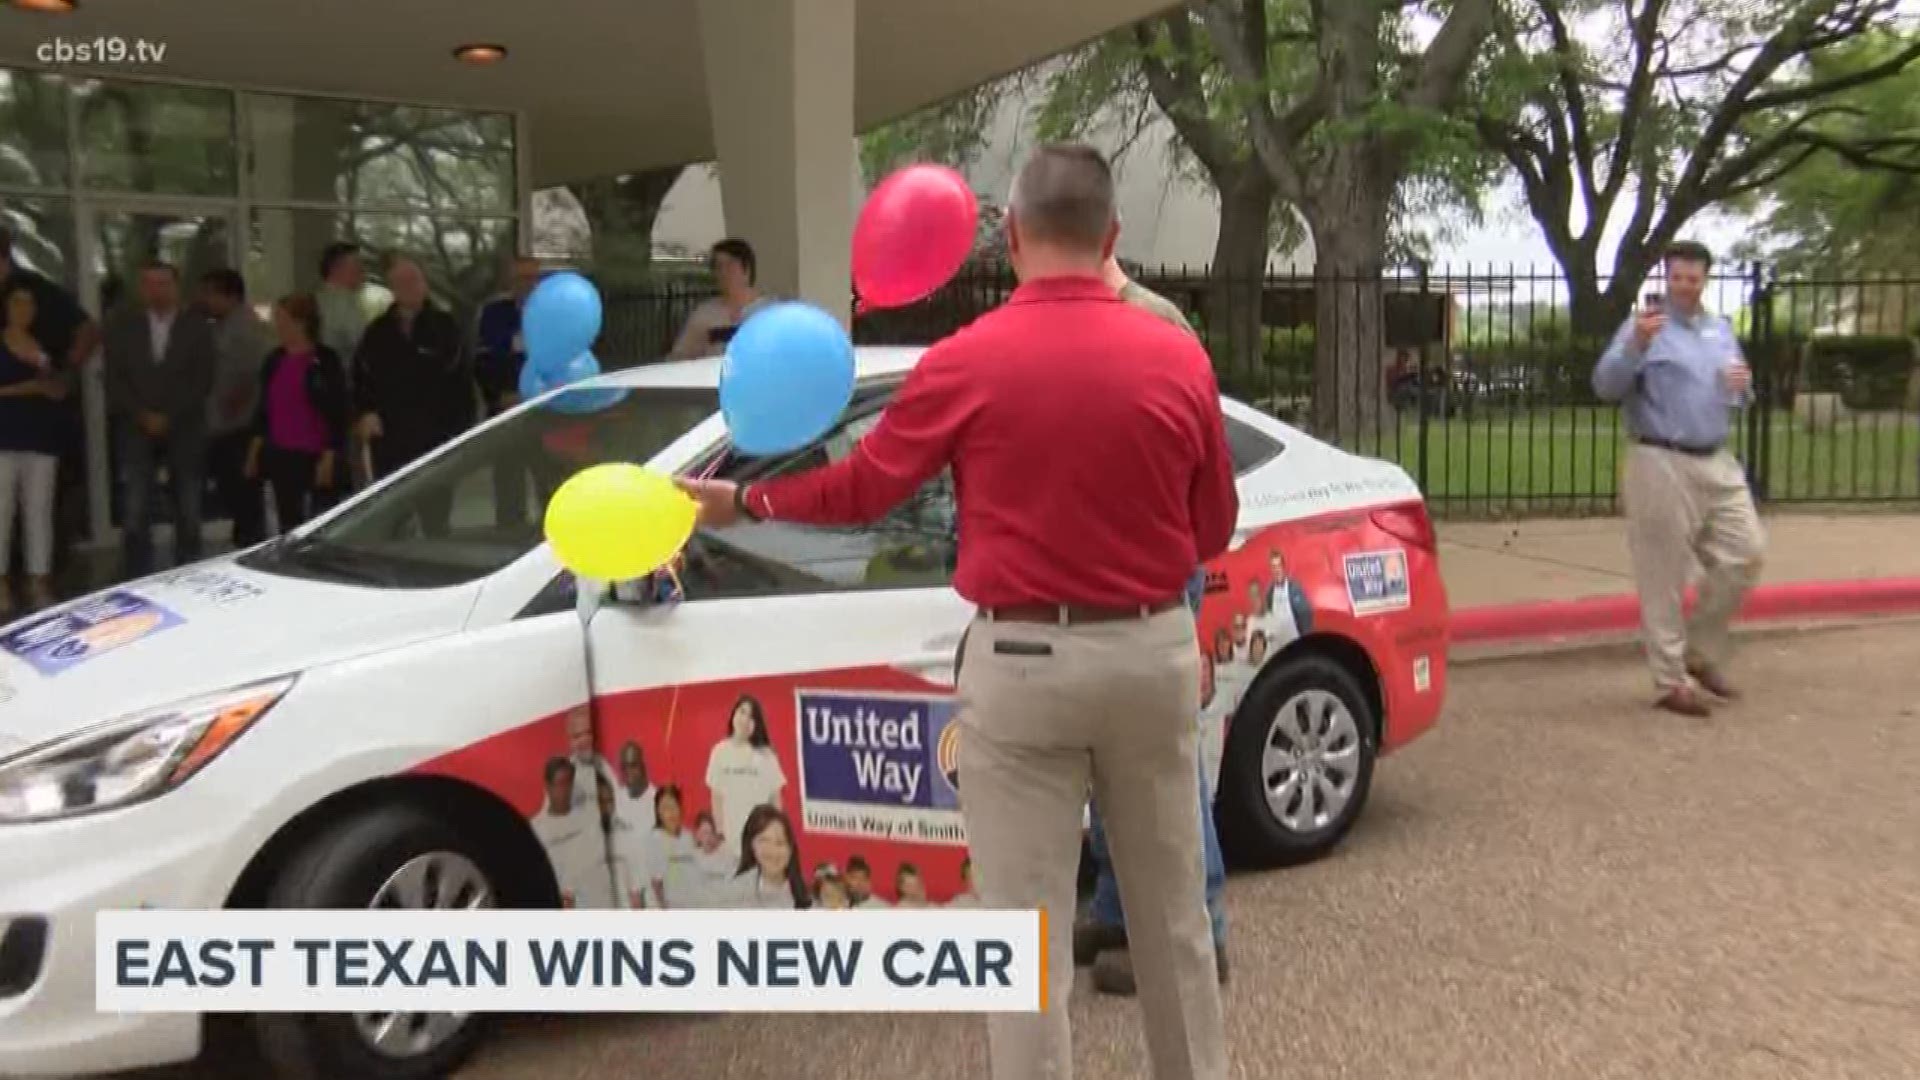 One man was given the keys to a new car, and it only cost him a donation to the United Way of Smith County!